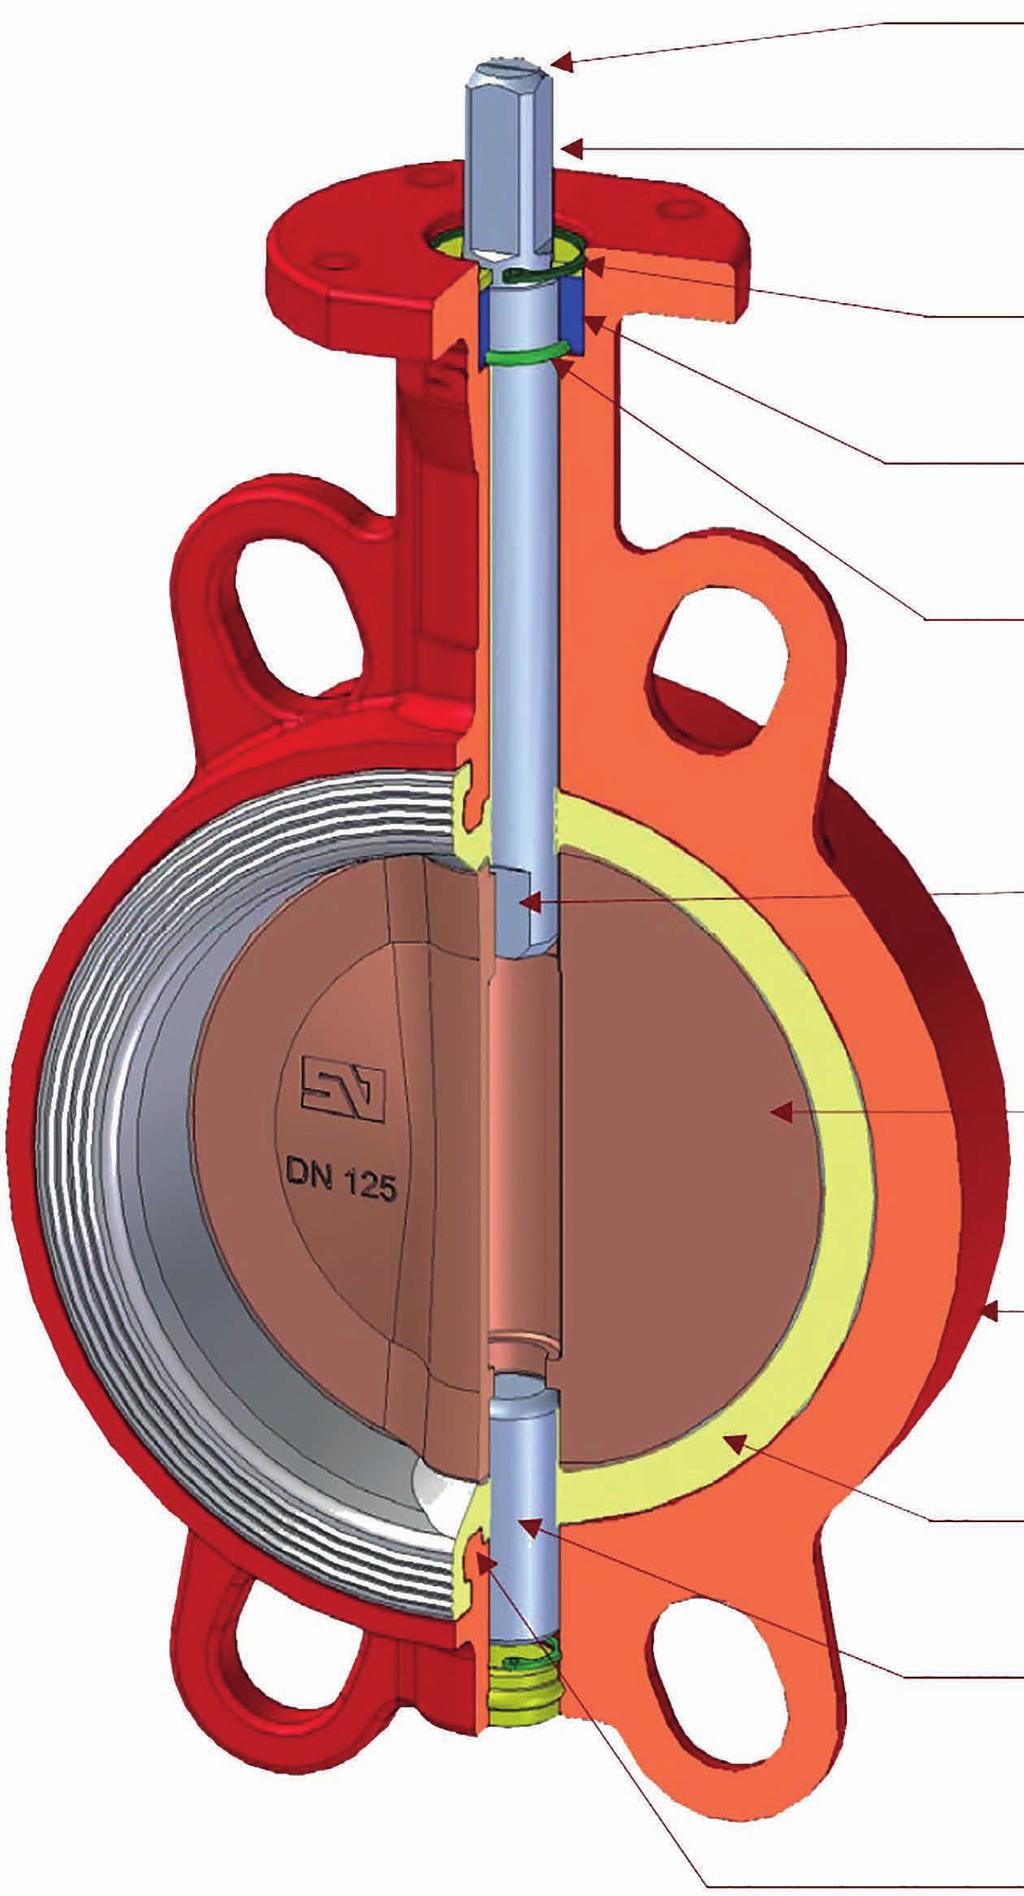 Advantages of butterfly valves All components of the valve can be dismantled and are interchangeable. Disc Position Indicator Shaft According to ISO standard.